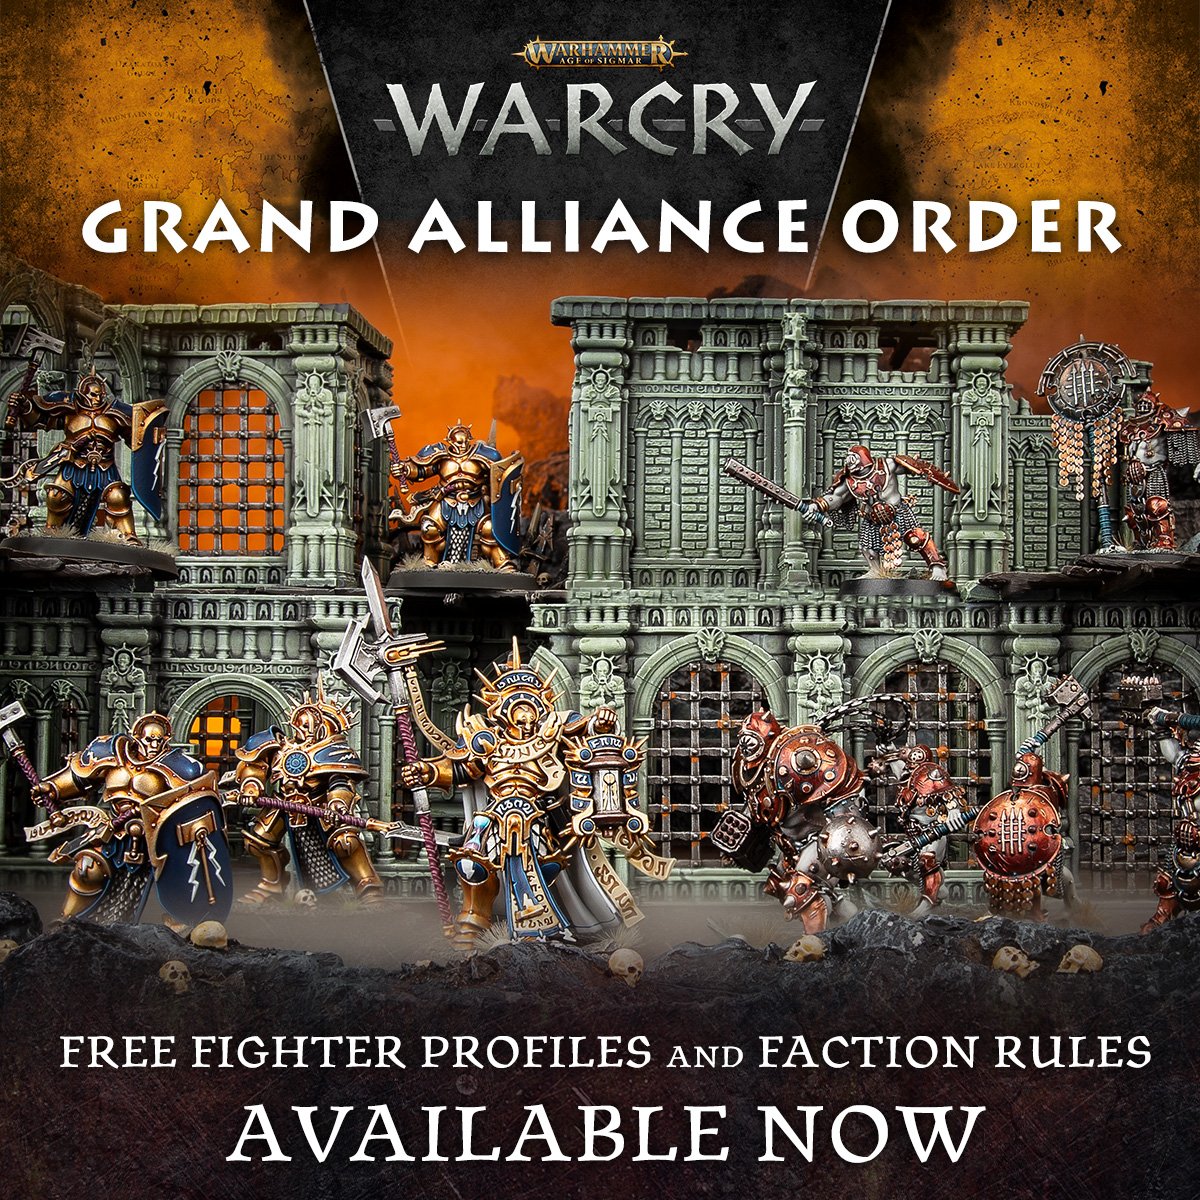 Free Order Fighter Profiles - Warcry